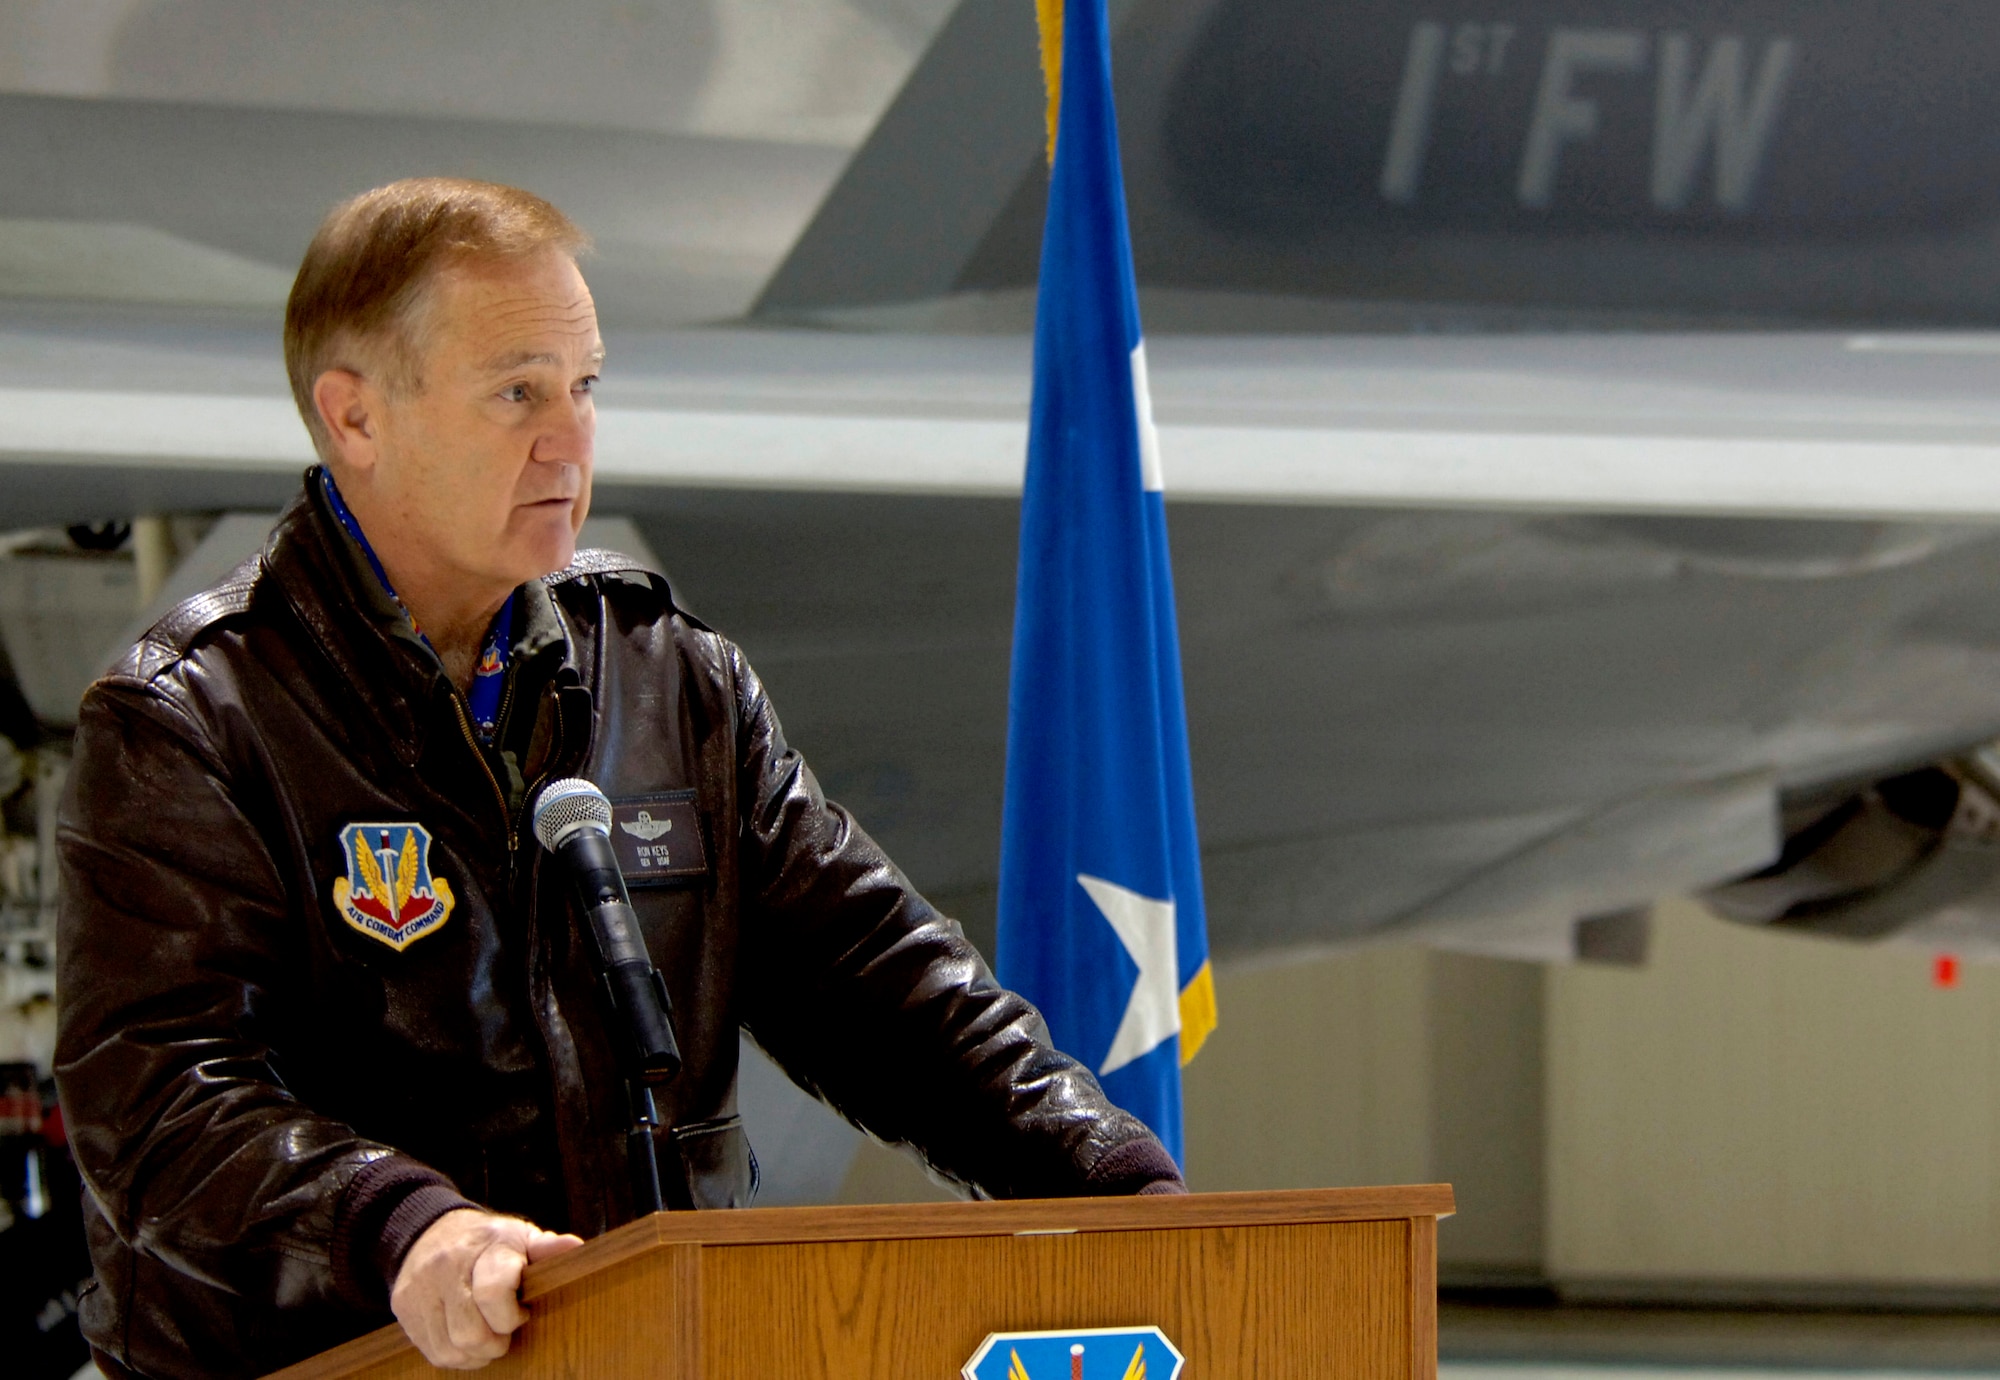 LANGLEY AIR FORCE BASE, Va. (AFPN) -- Gen. Ronald Keys answers questions during a press conference to announce the F-22A Raptor's initial operating capability today. General Keys is the commander of Air Combat Command. (U.S. Air Force photo by Staff Sgt. Quinton T. Burris)